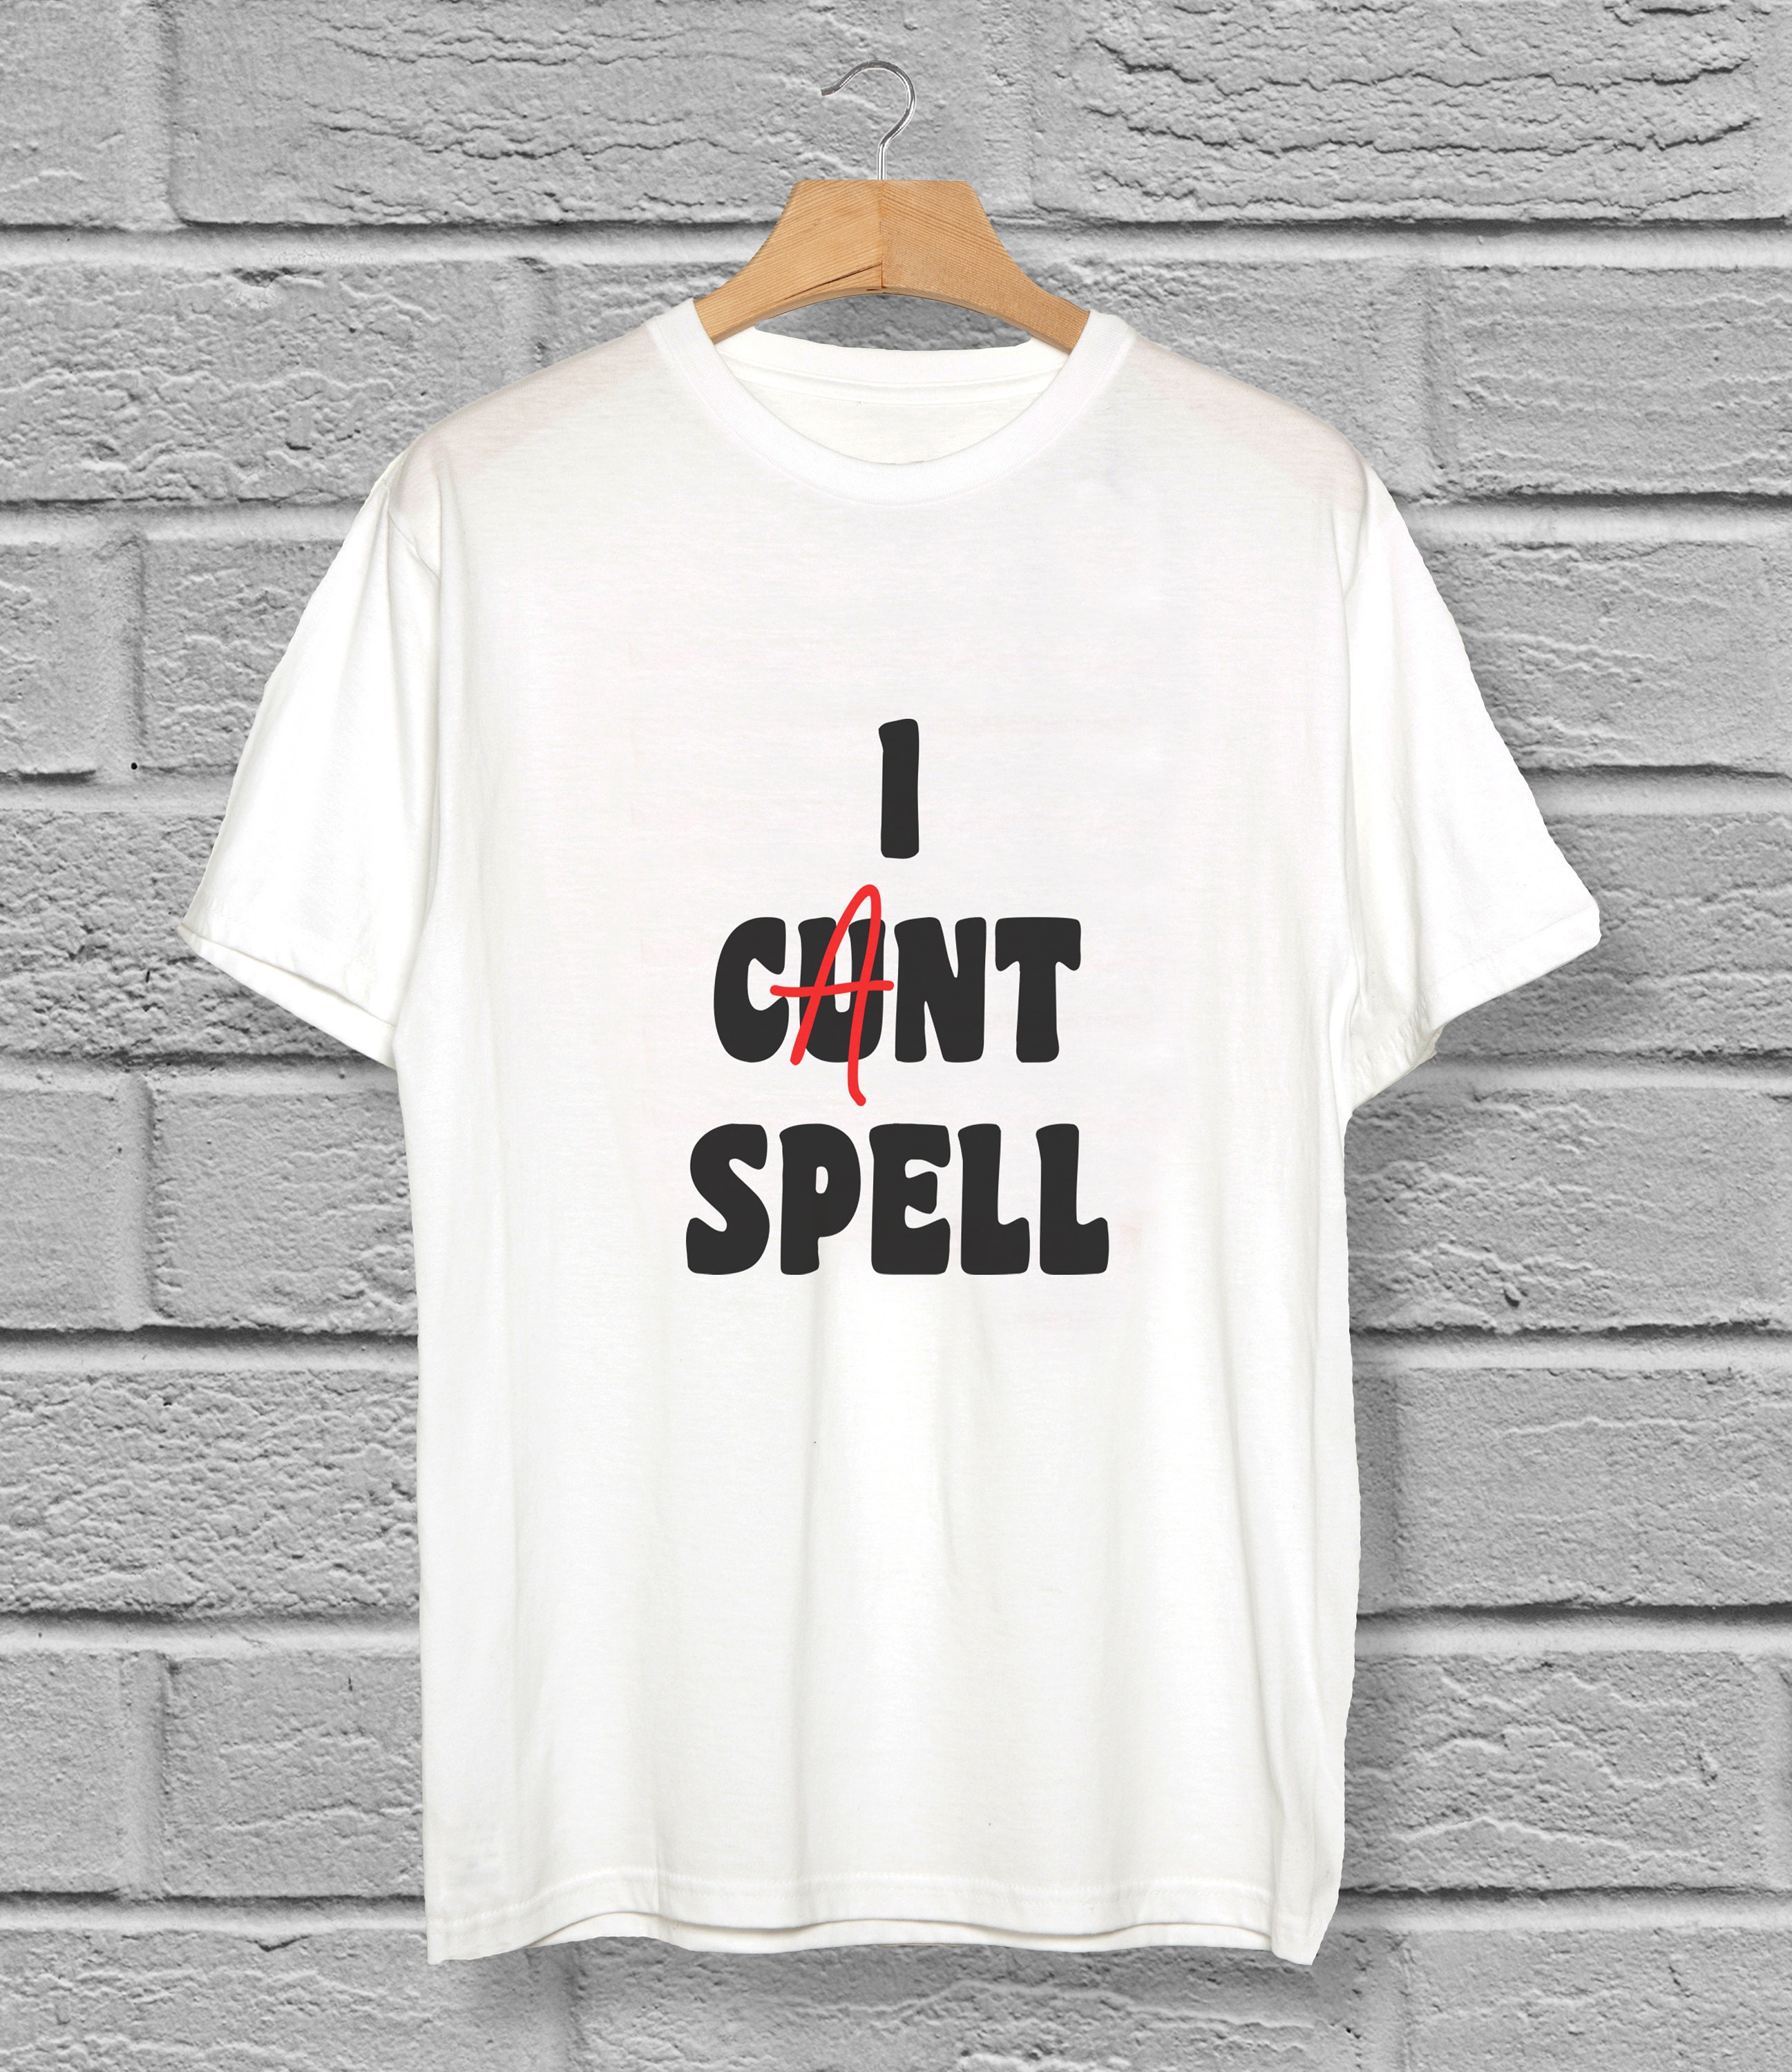 Cunt Spell T-shirt Funny and Offensive Top Rude - Etsy